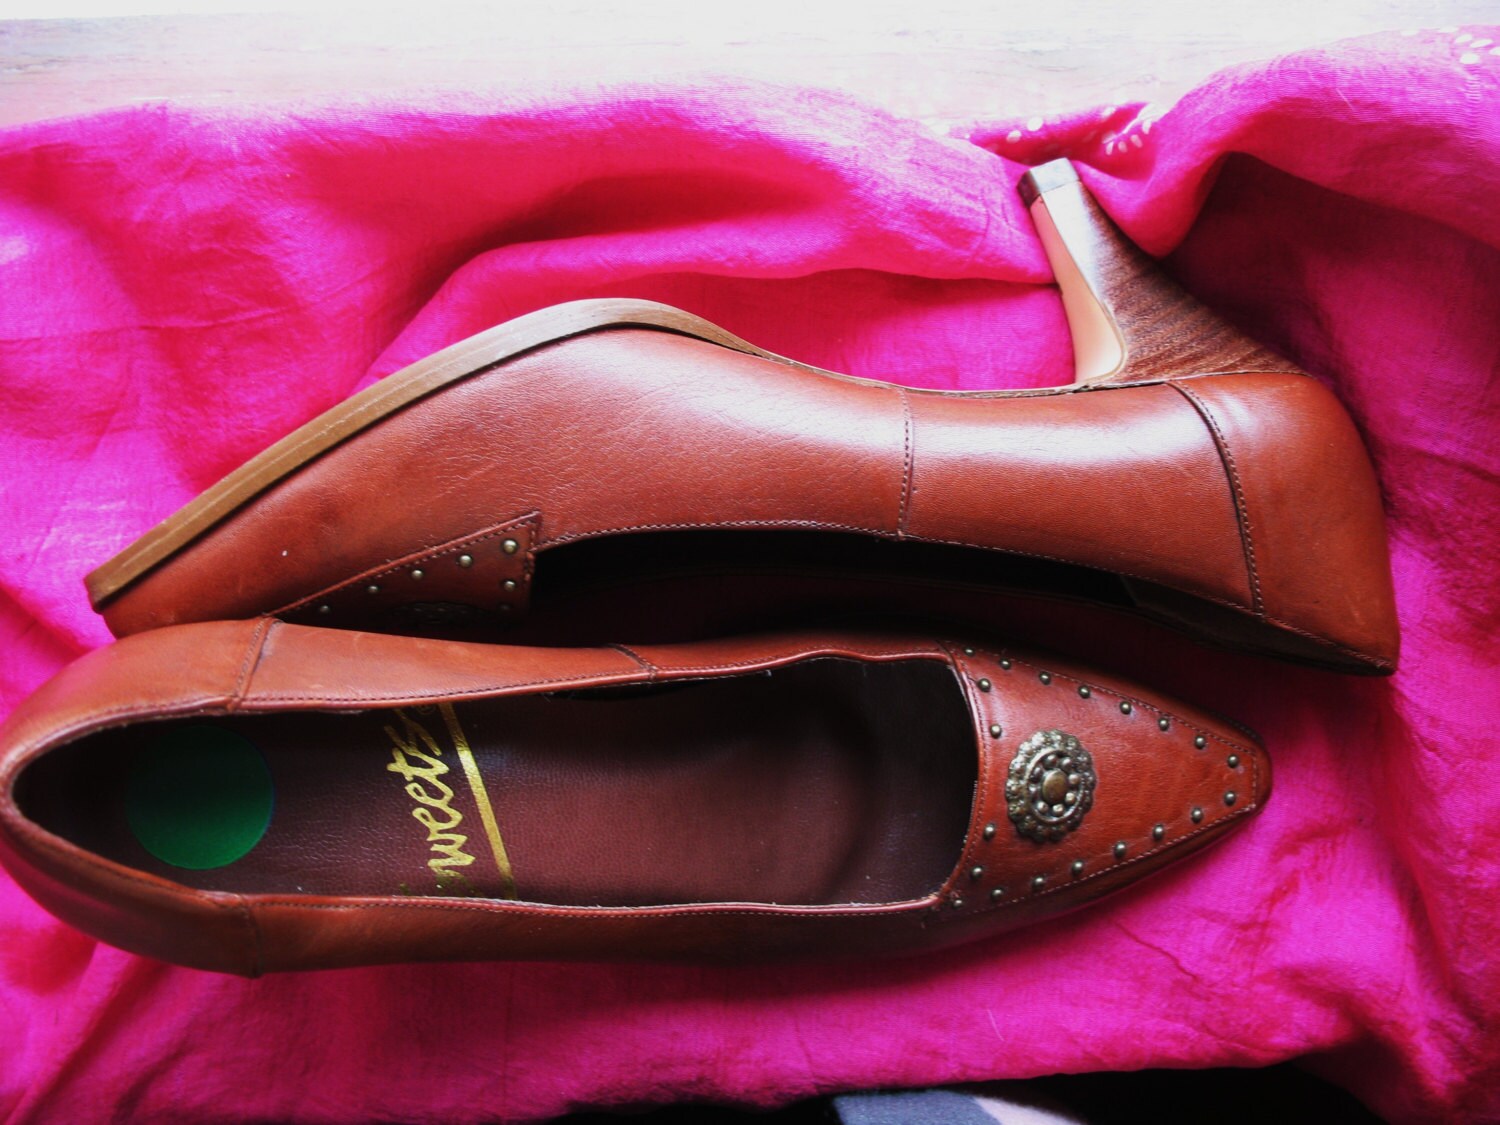 Amaizing Vintage SWEETS Shoes Rusty Brown Leather Medium Heels